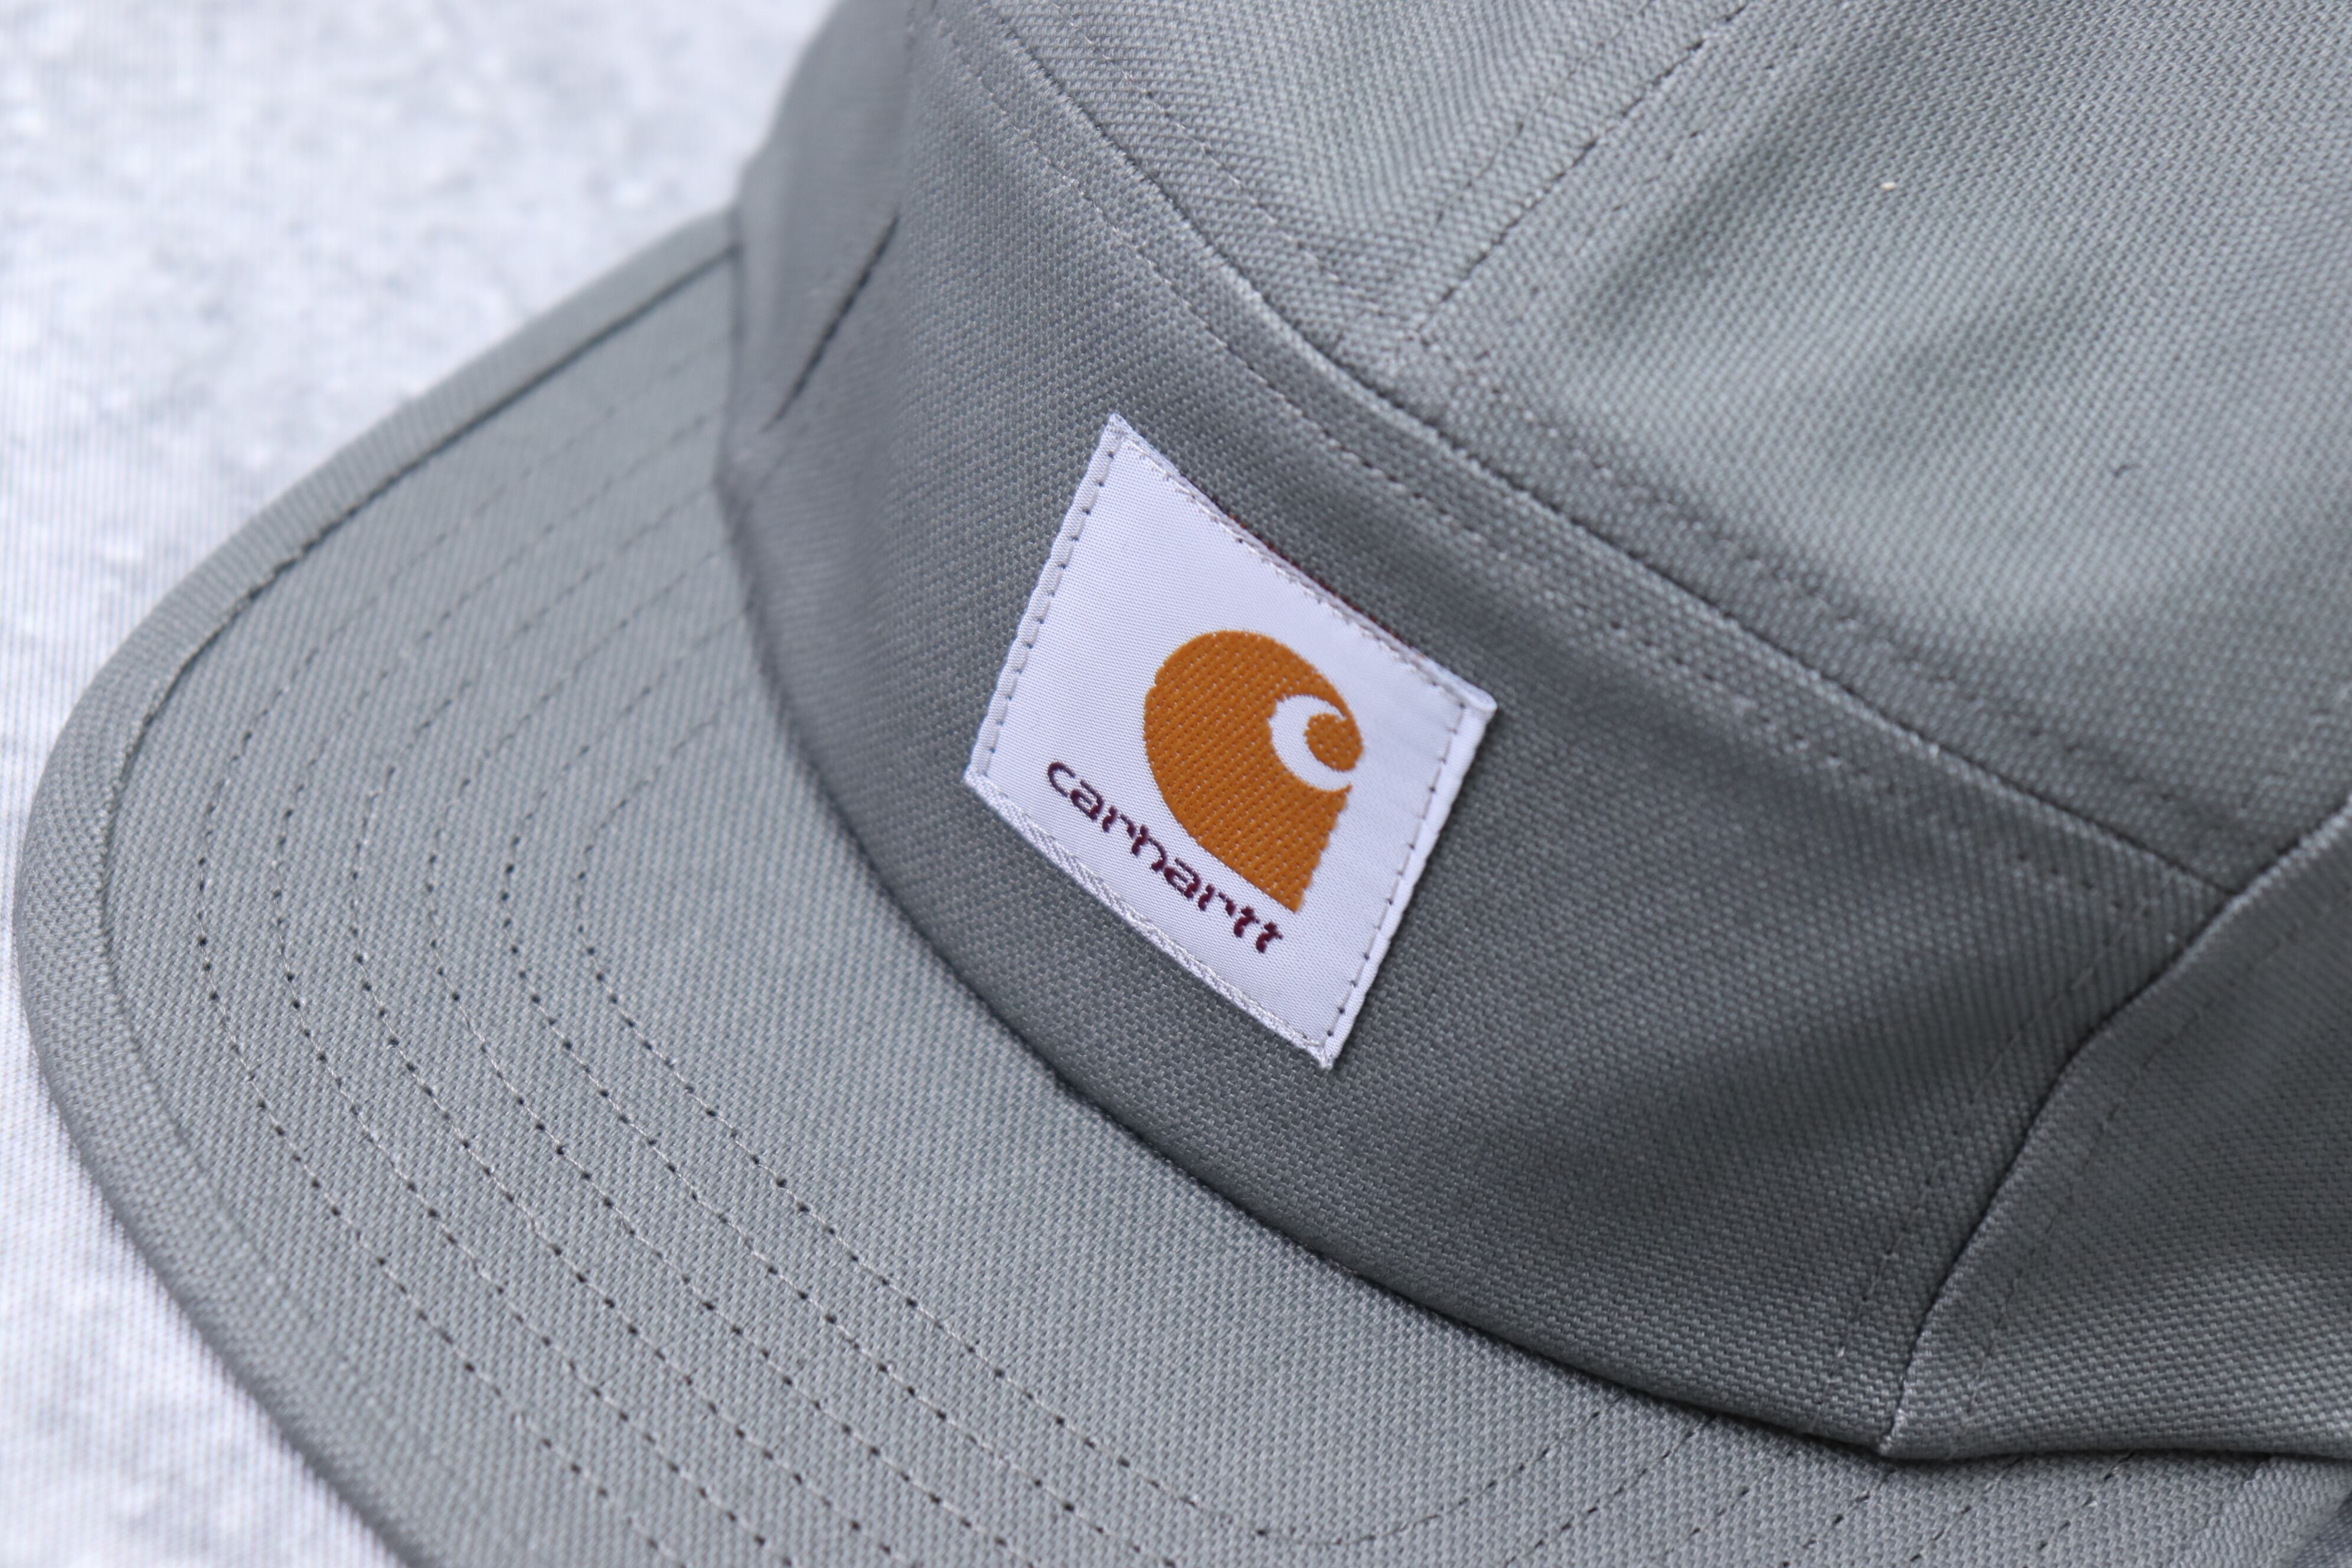 Carhartt WIP】 BACKLEY CAP “Thyme” カーハート ジェットキャップ タイム | ROGER'S North land